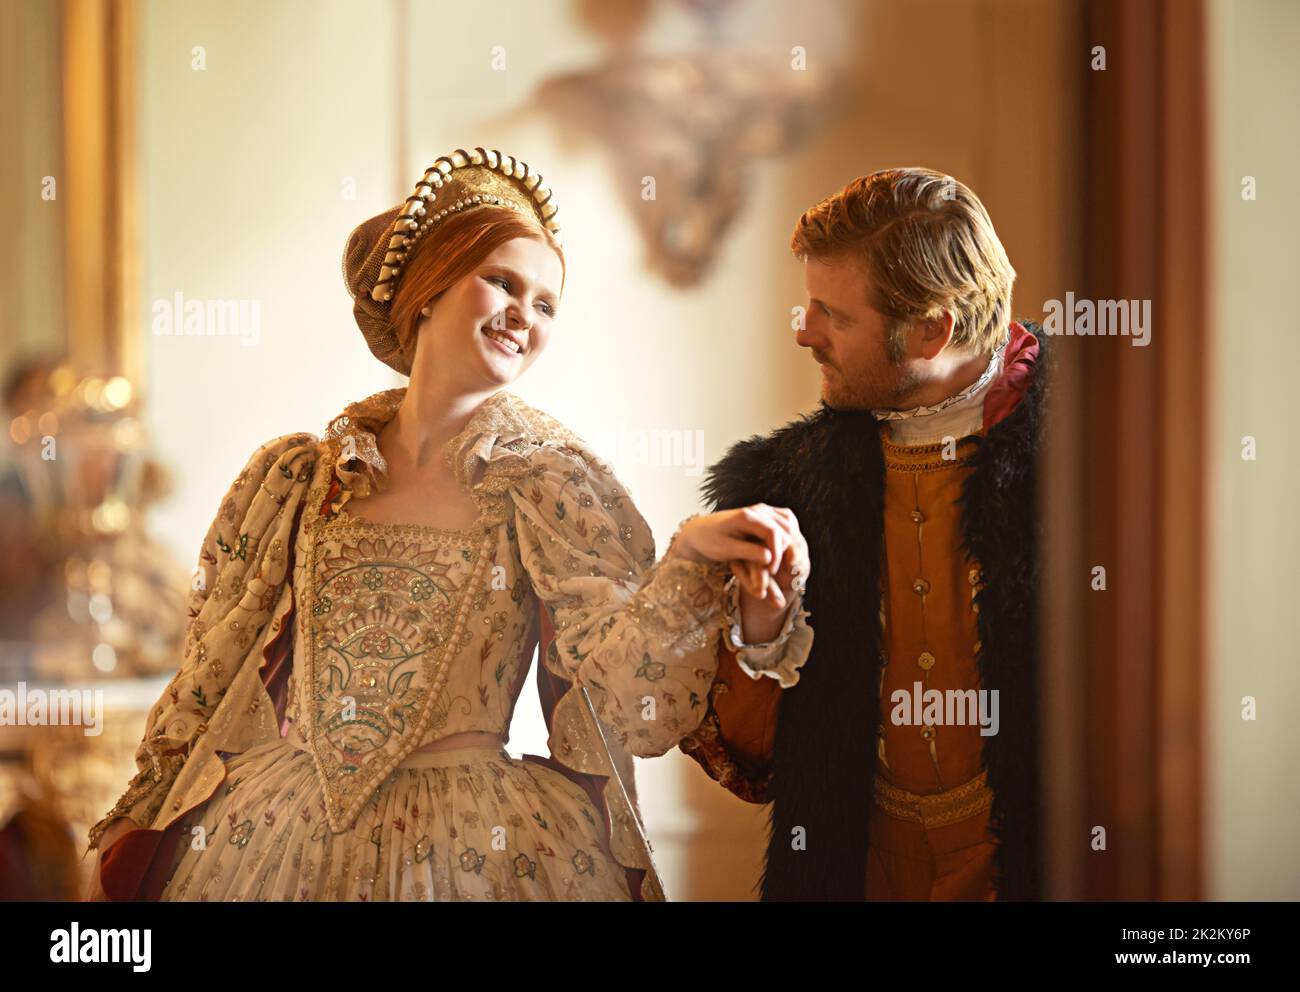 Allow me....A king and queen dancing together in their palace. Stock Photo